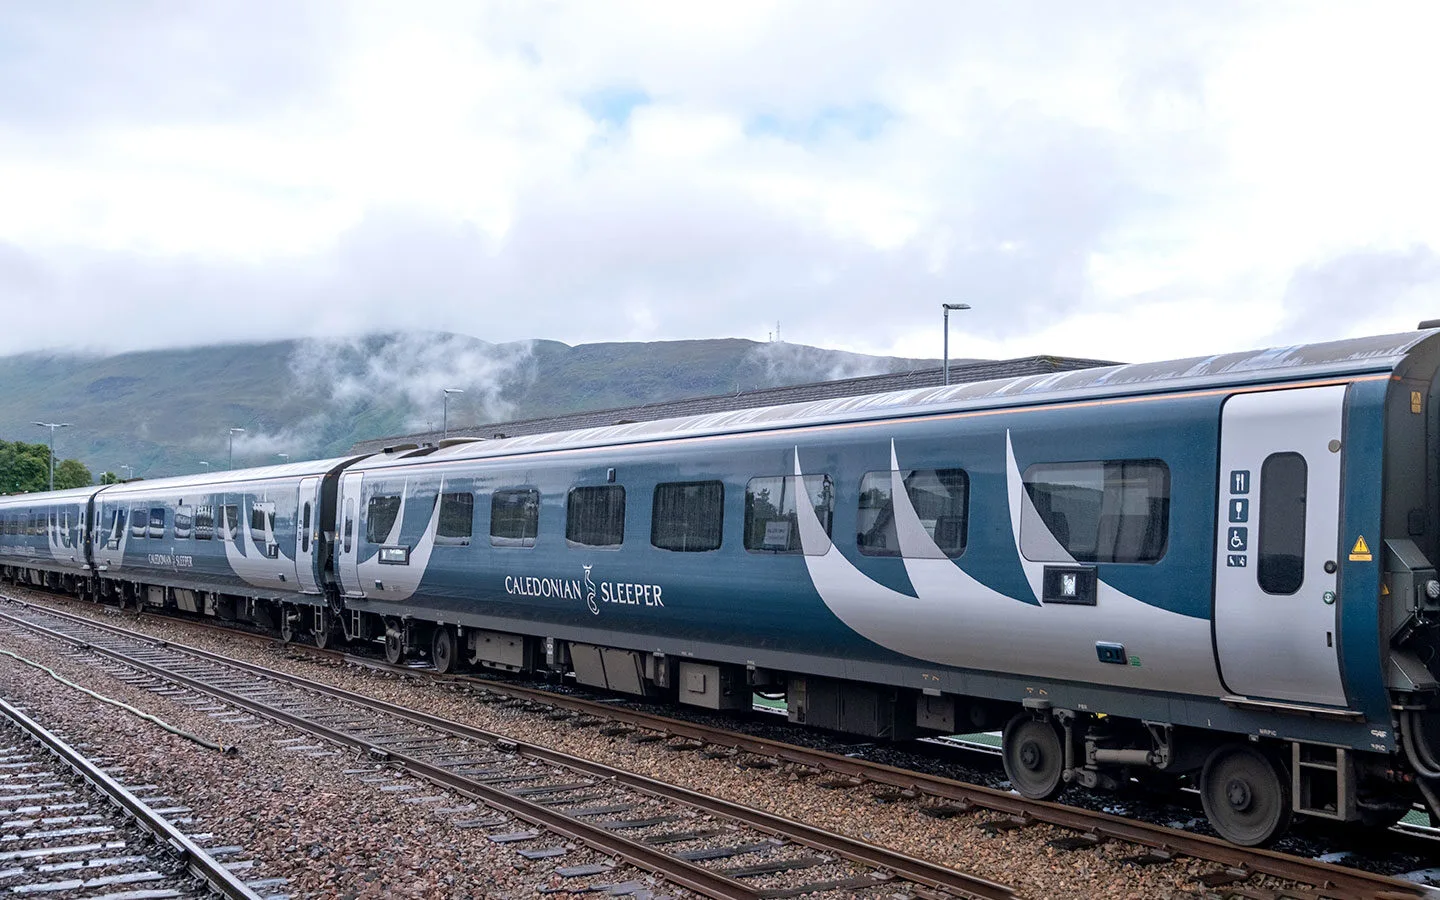 The Caledonian Sleeper train in Fort William